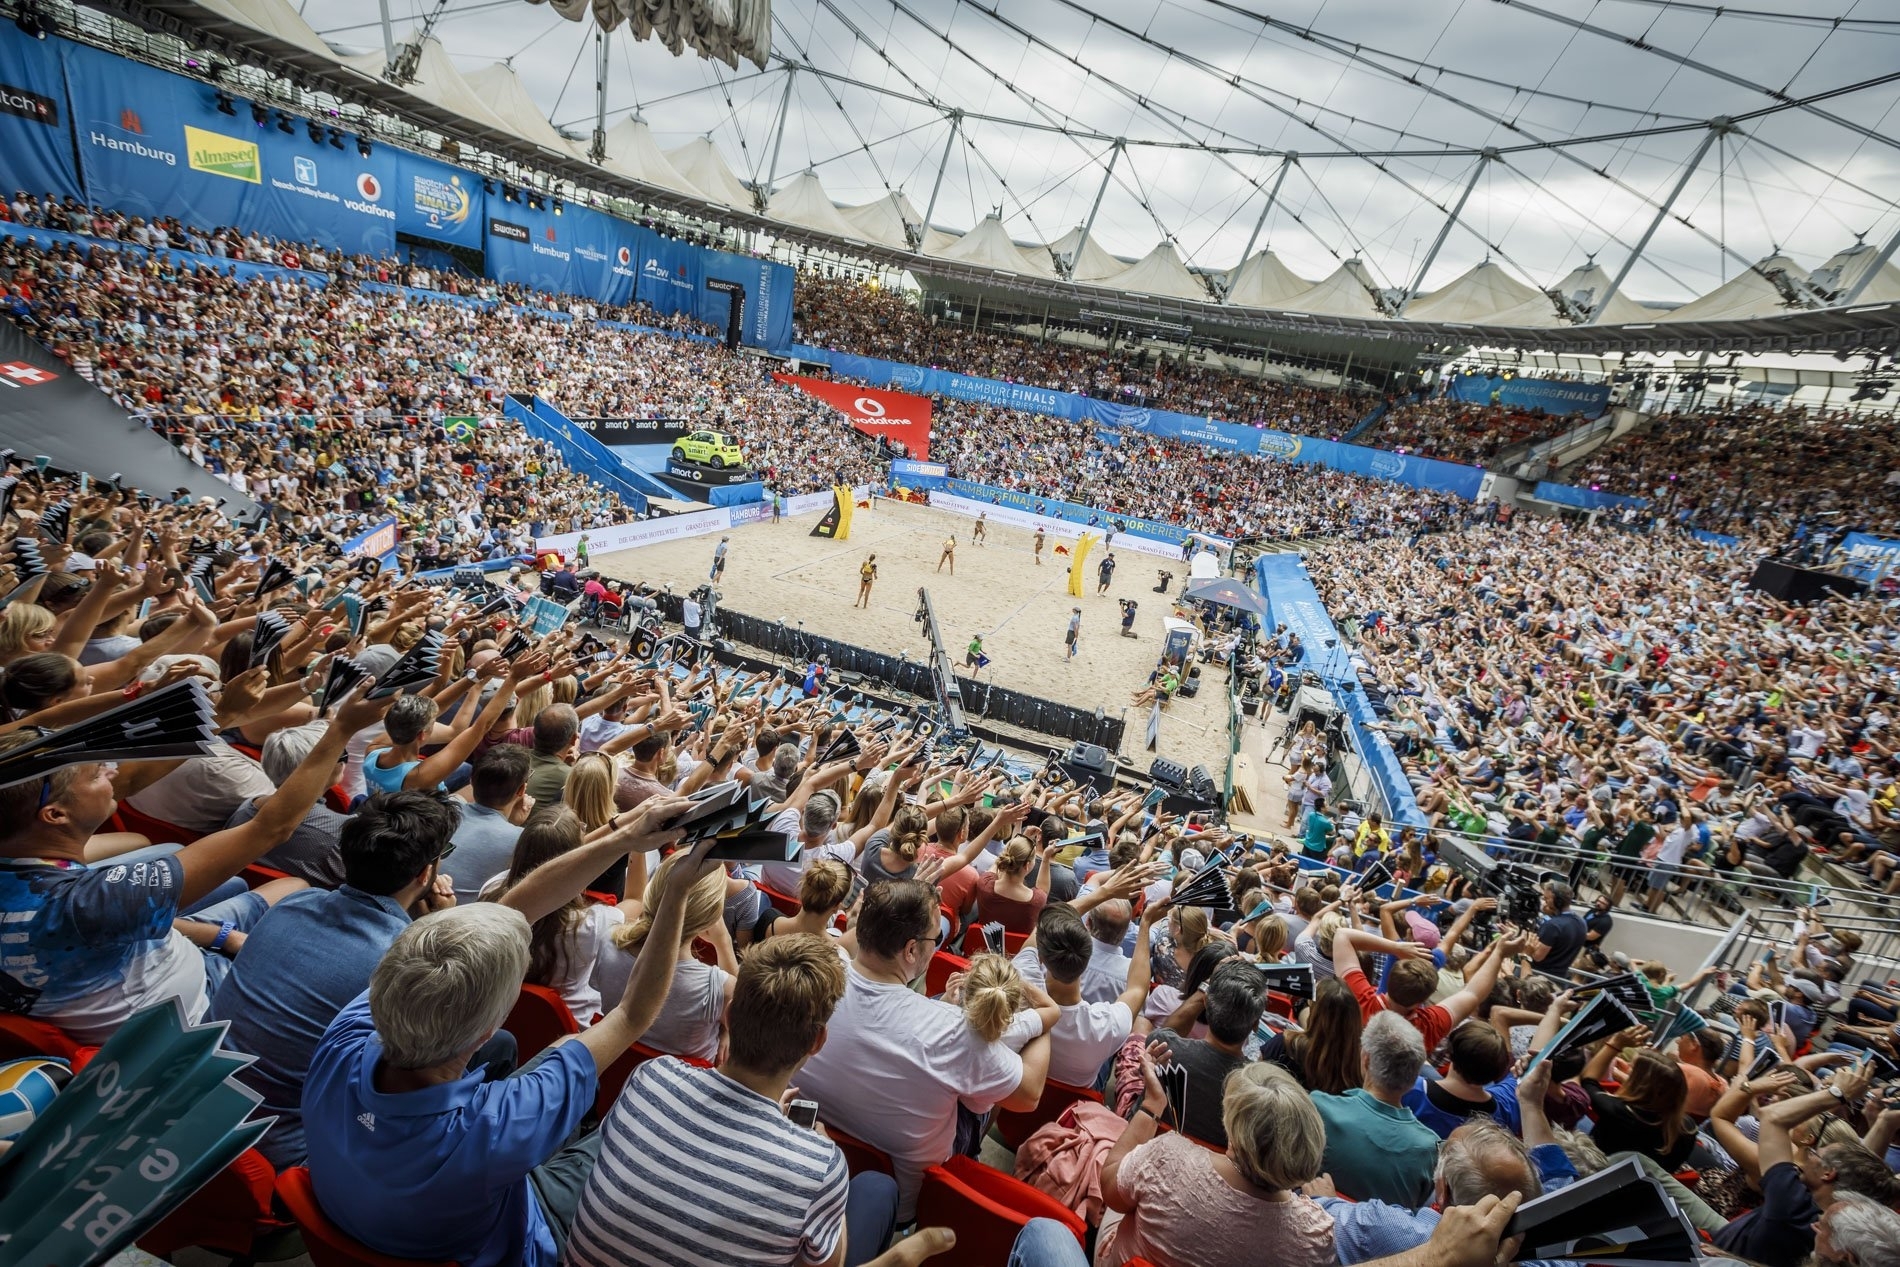 The Red Bull Beach Arena was packed!